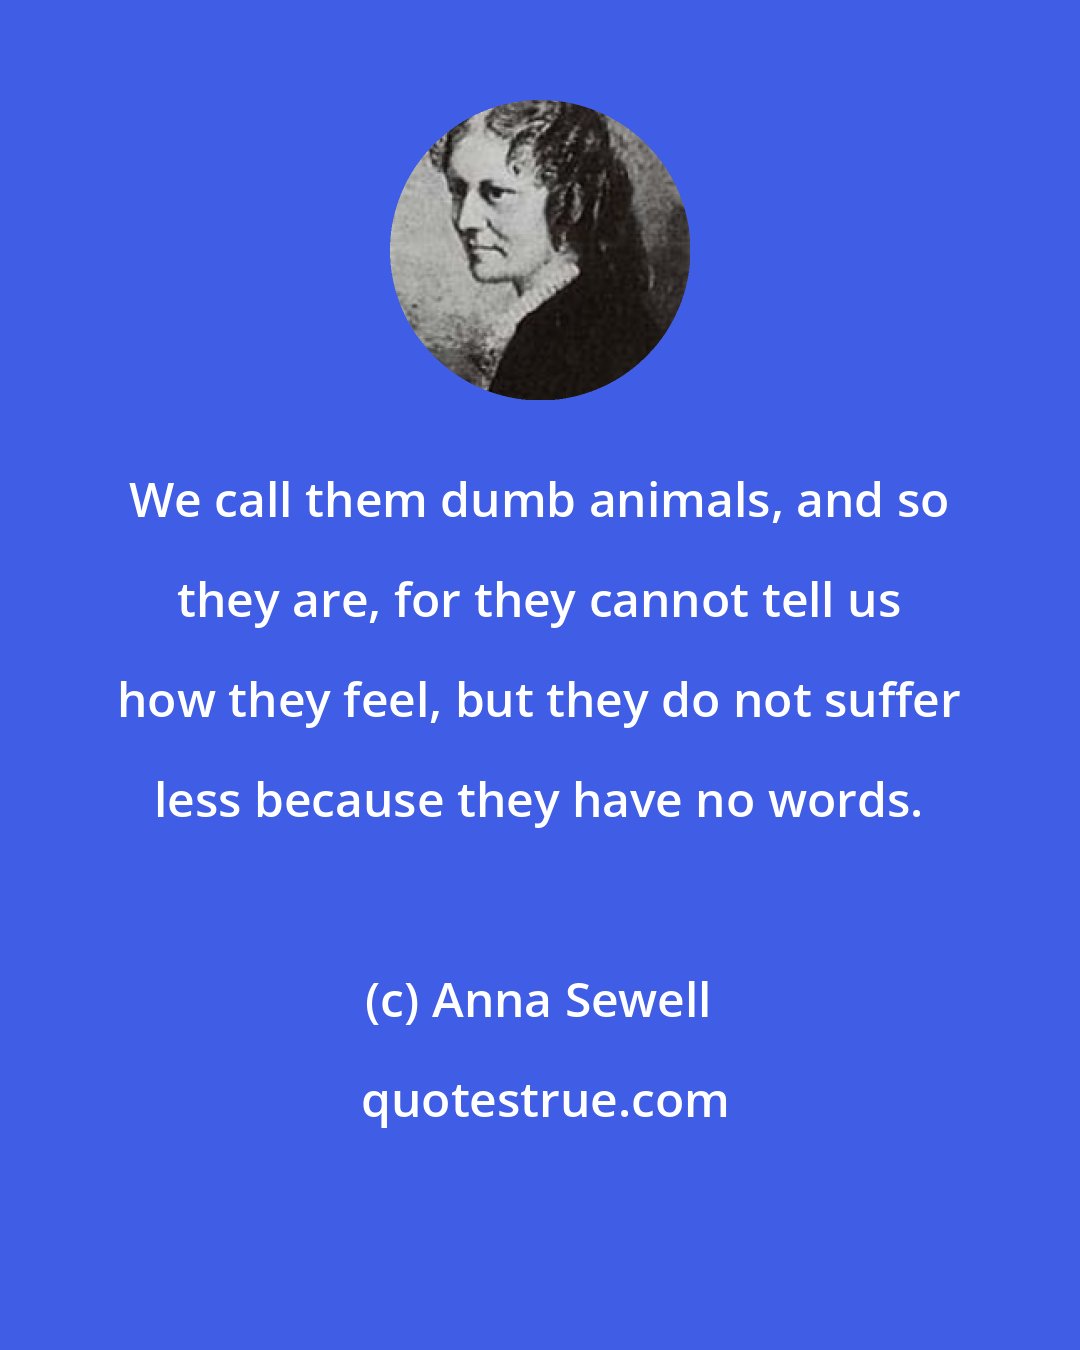 Anna Sewell: We call them dumb animals, and so they are, for they cannot tell us how they feel, but they do not suffer less because they have no words.